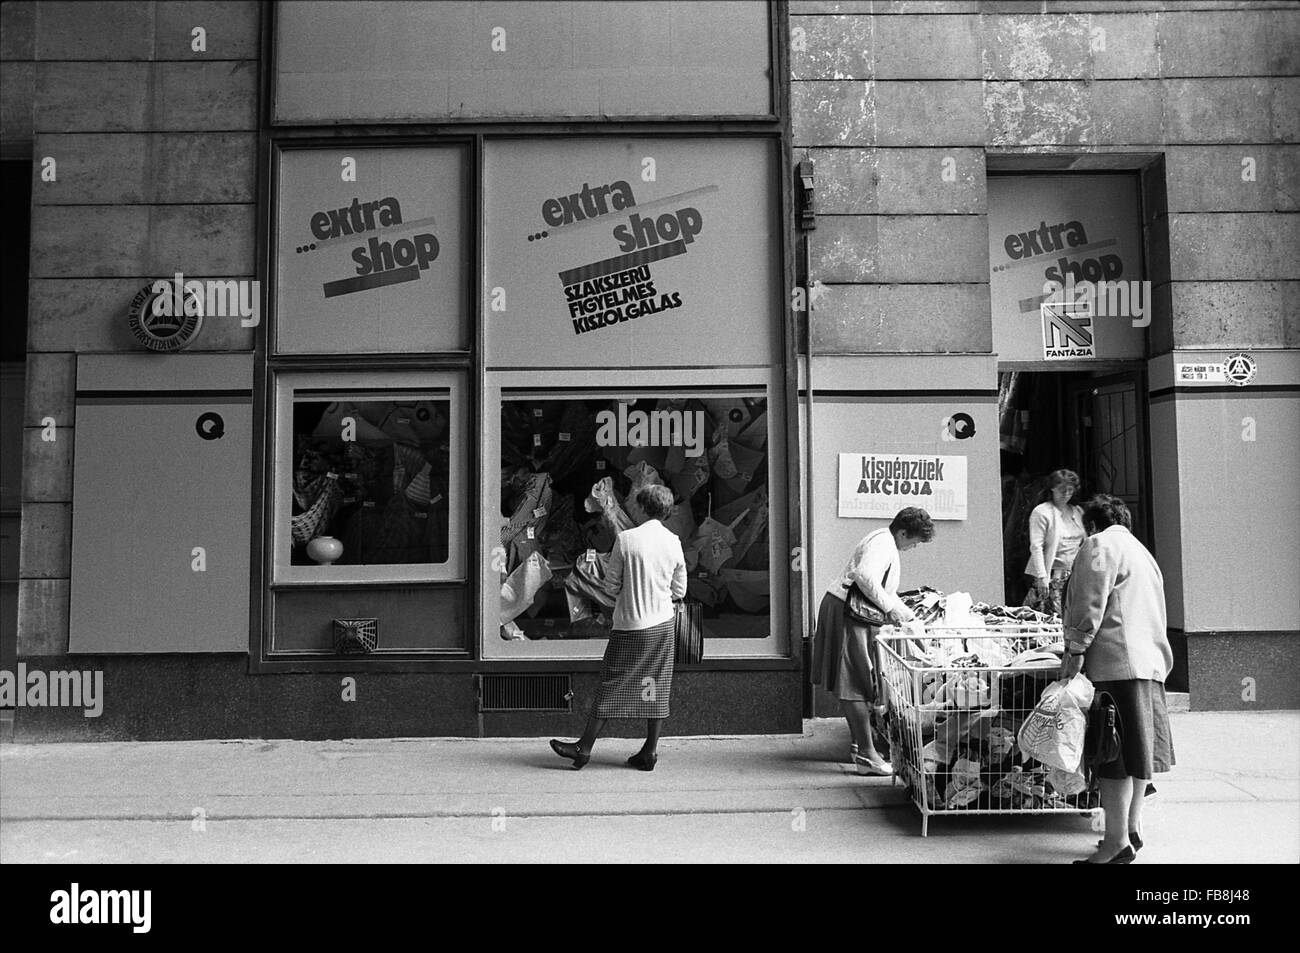 Glance on Bupapest at the time of the Nineties. -  1990  -  Hungary / Budapest  -  Glance on Bupapest at the time of the Nineties. -  Daily-life scene. A Women's fashion store. One Hungarian woman is looking at the shop window while two others are searching in two big baskets.    -  Philippe Gras / Le Pictorium Stock Photo